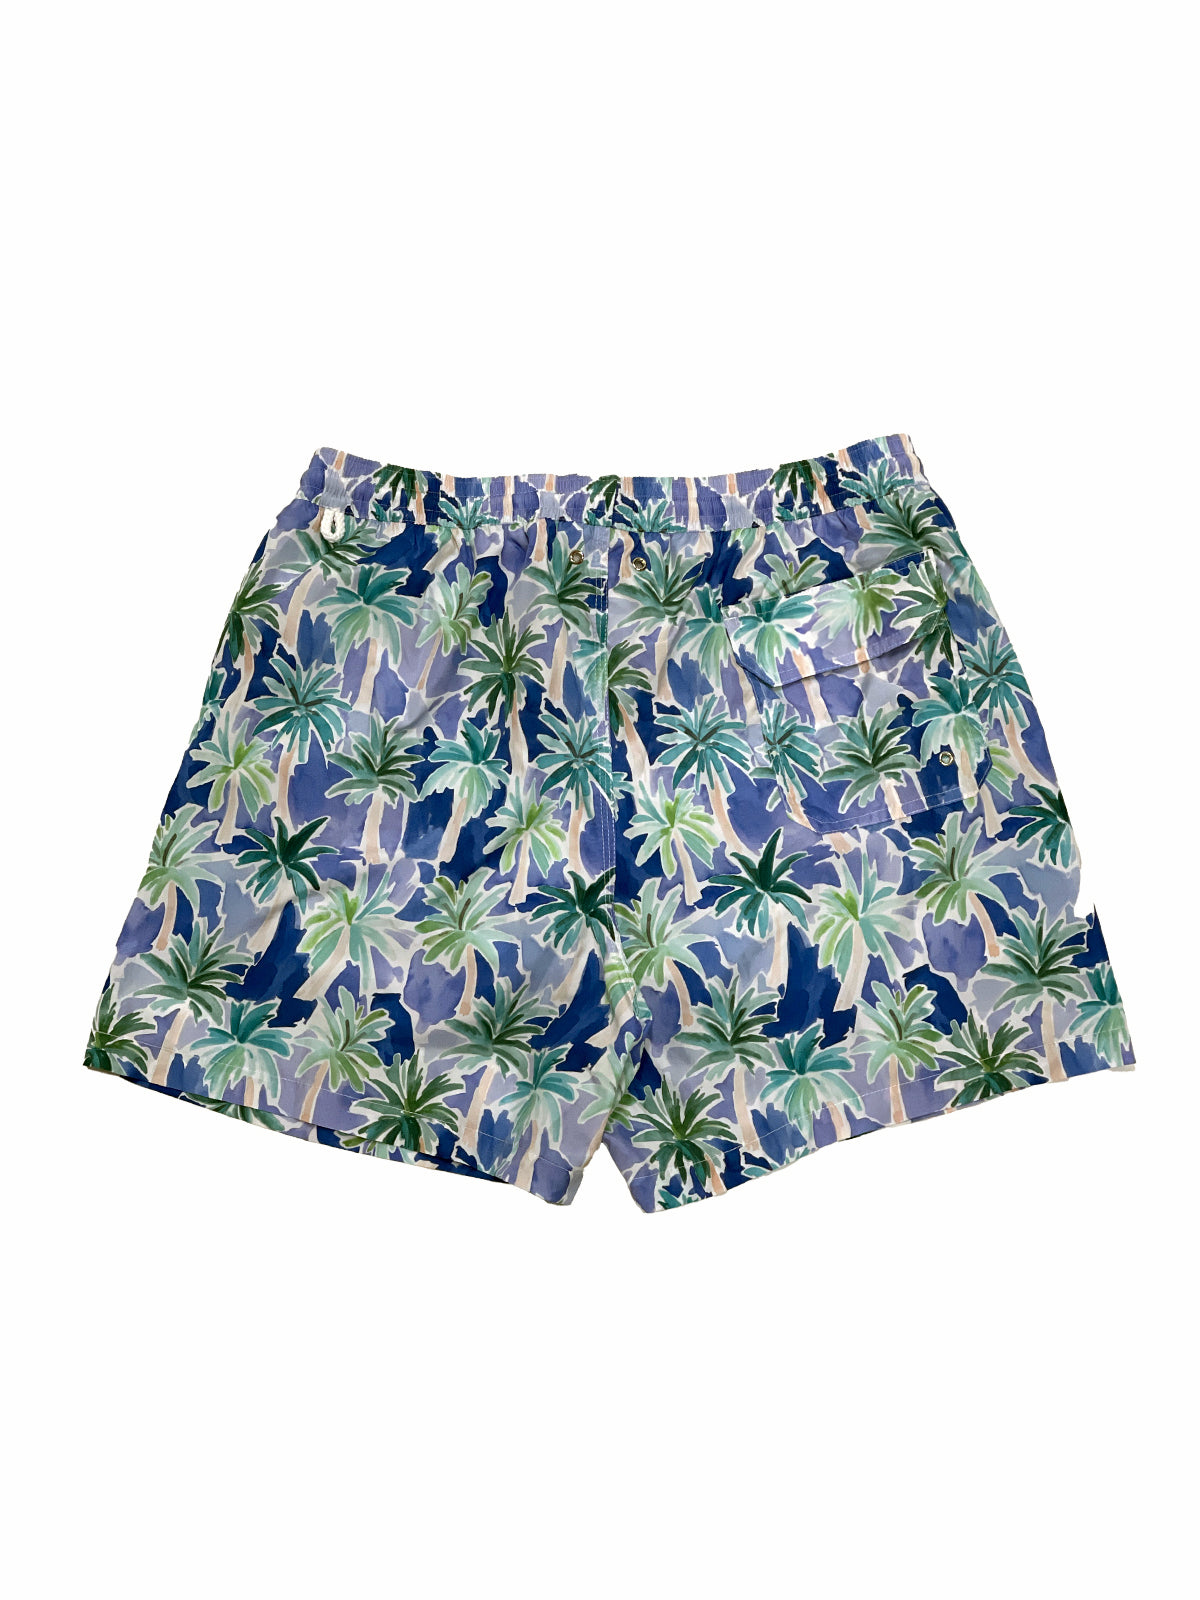 Abstract Floral Printed Swim Shorts